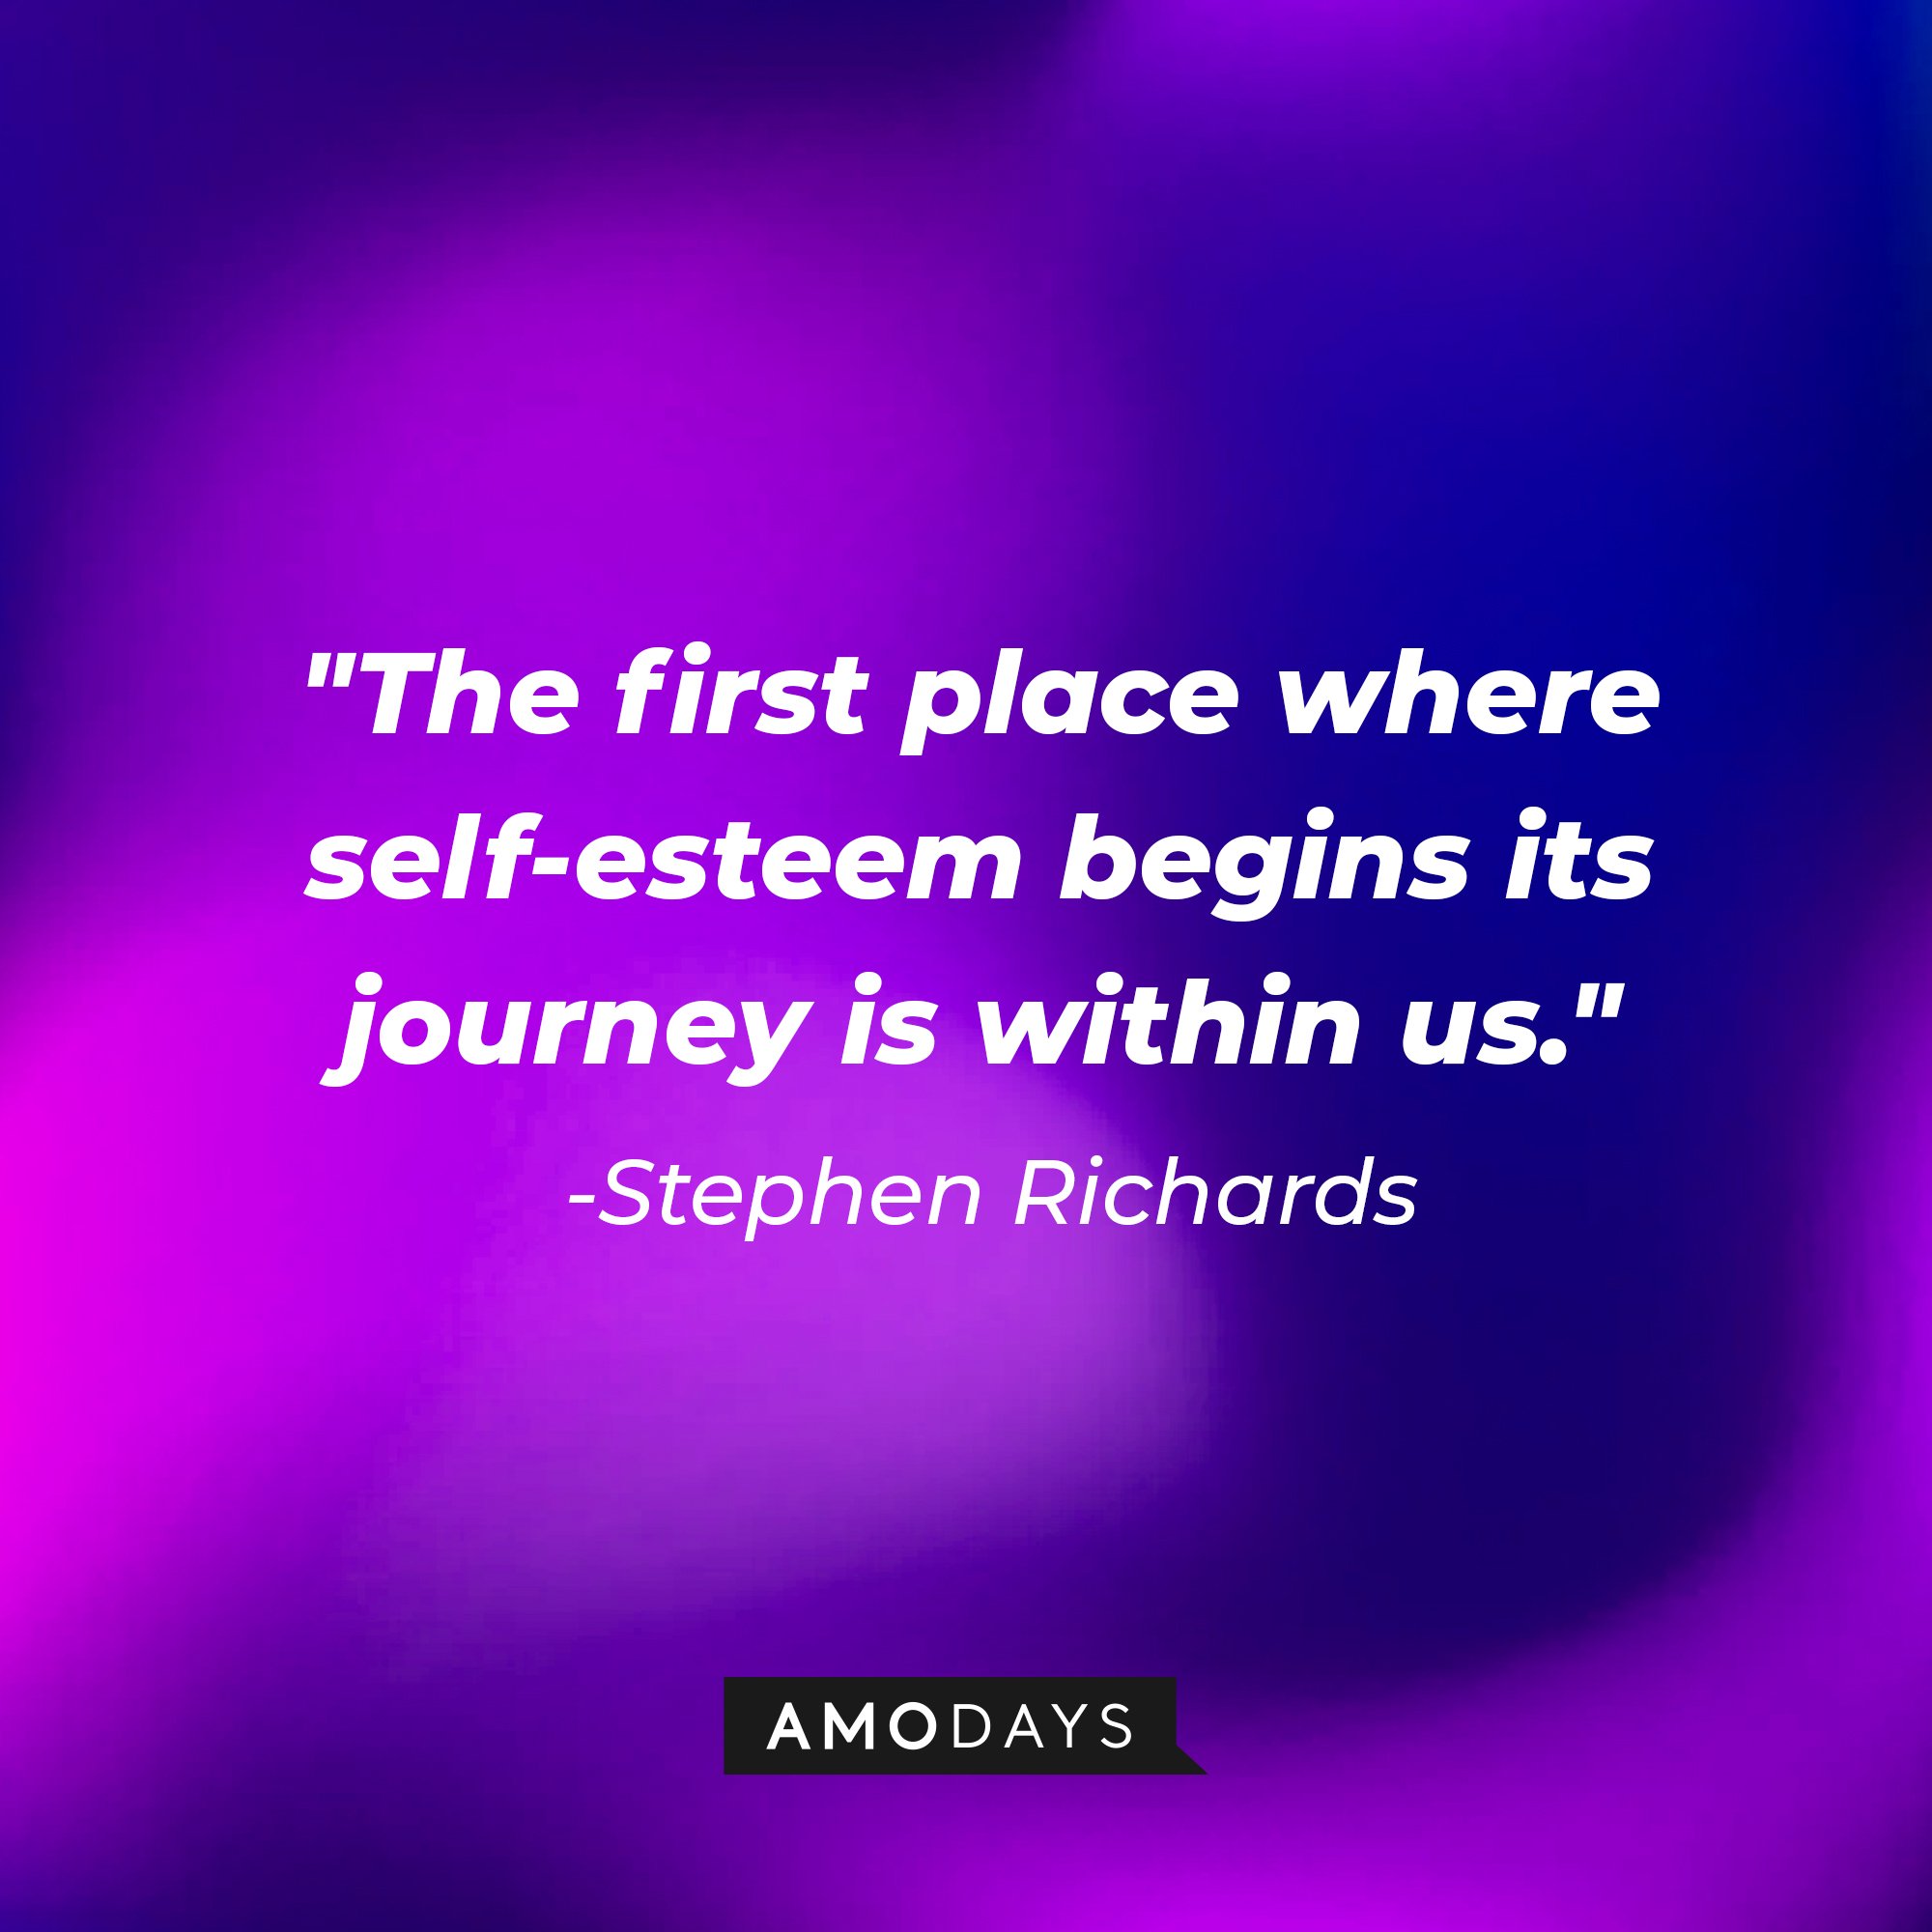 Stephen Richards' quote: "The first place where self-esteem begins its journey is within us." | Image: AmoDays